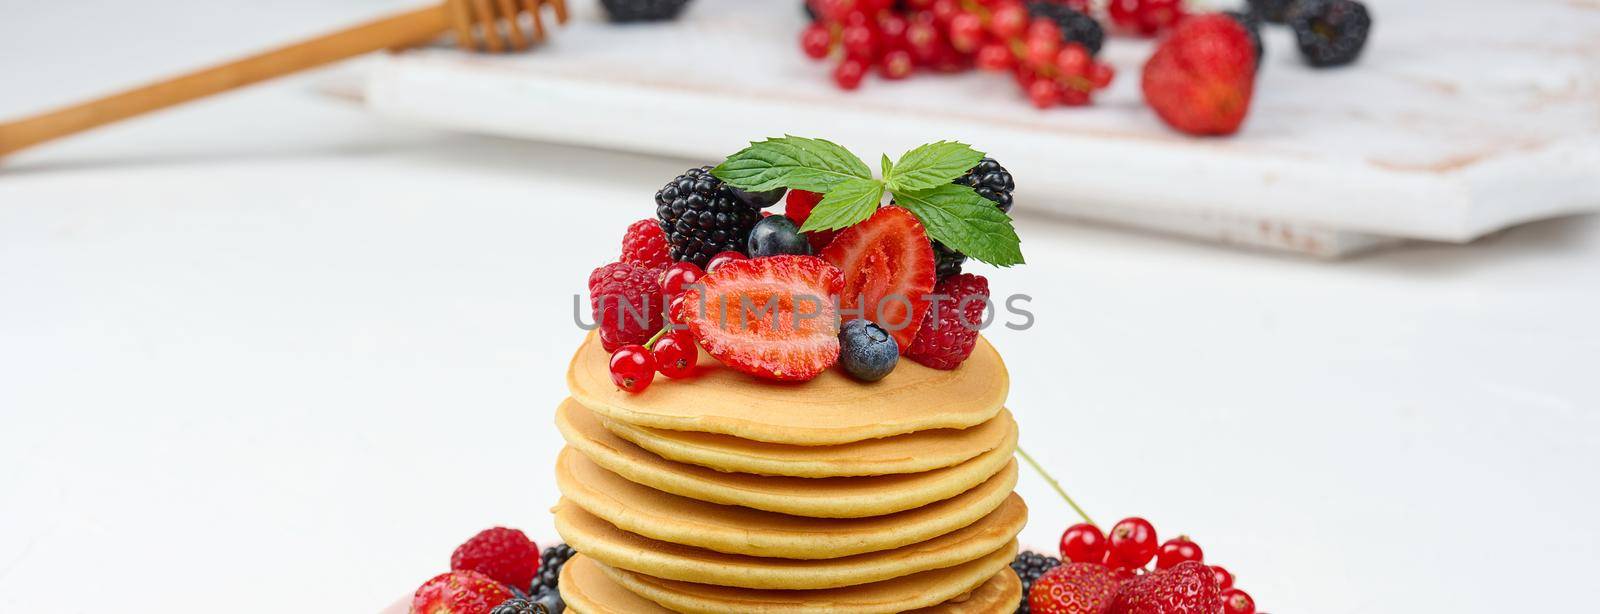 Stack of baked pancakes with fruits in a round plate on a white table, banner